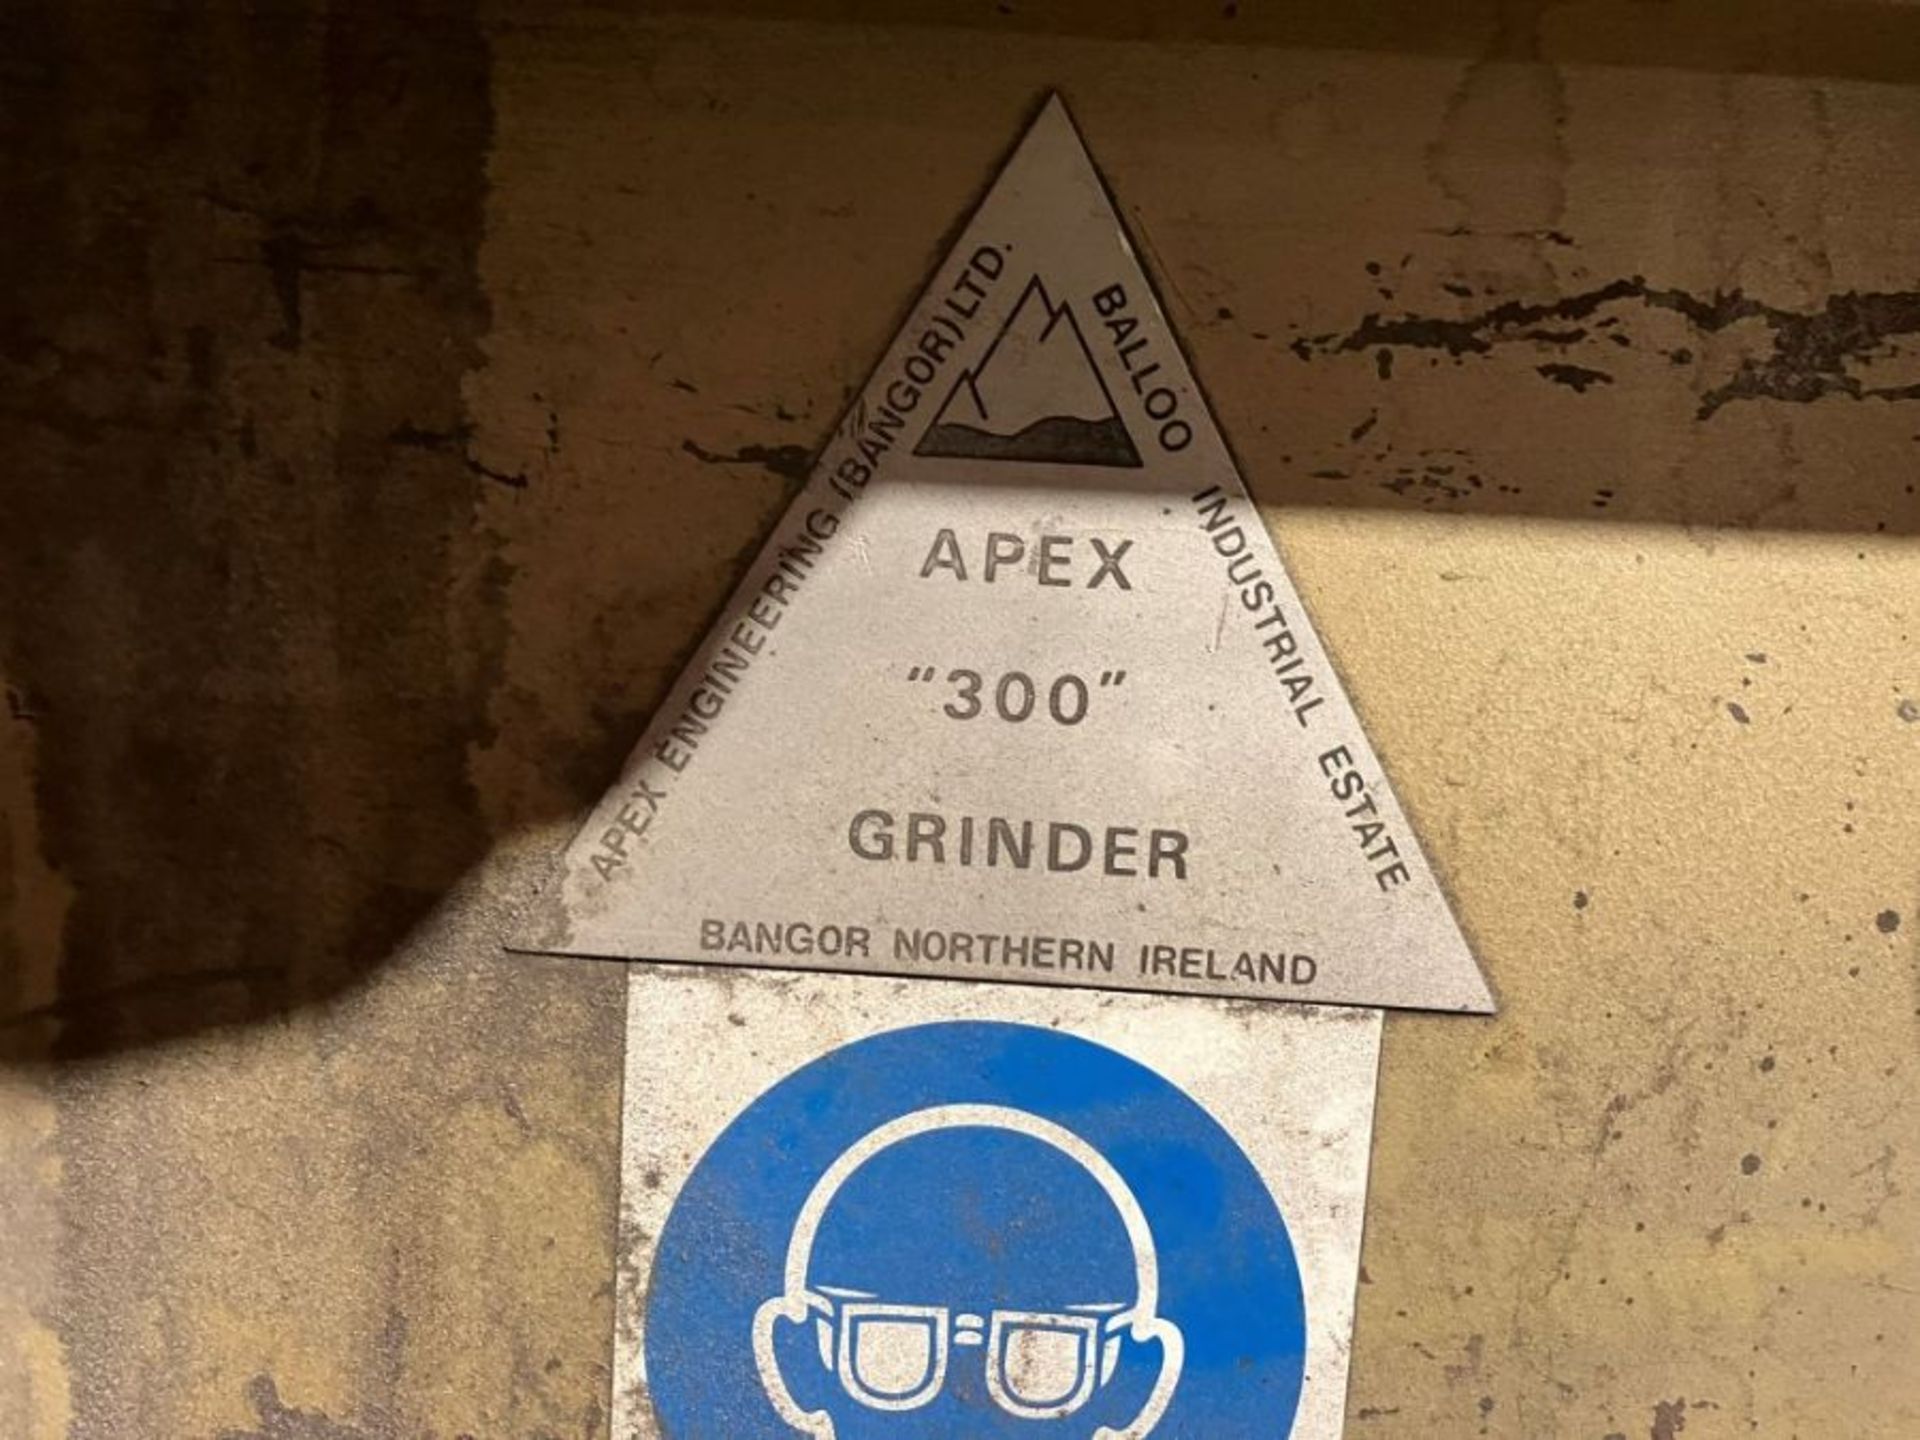 Apex 300 double ended grinder - Image 8 of 8